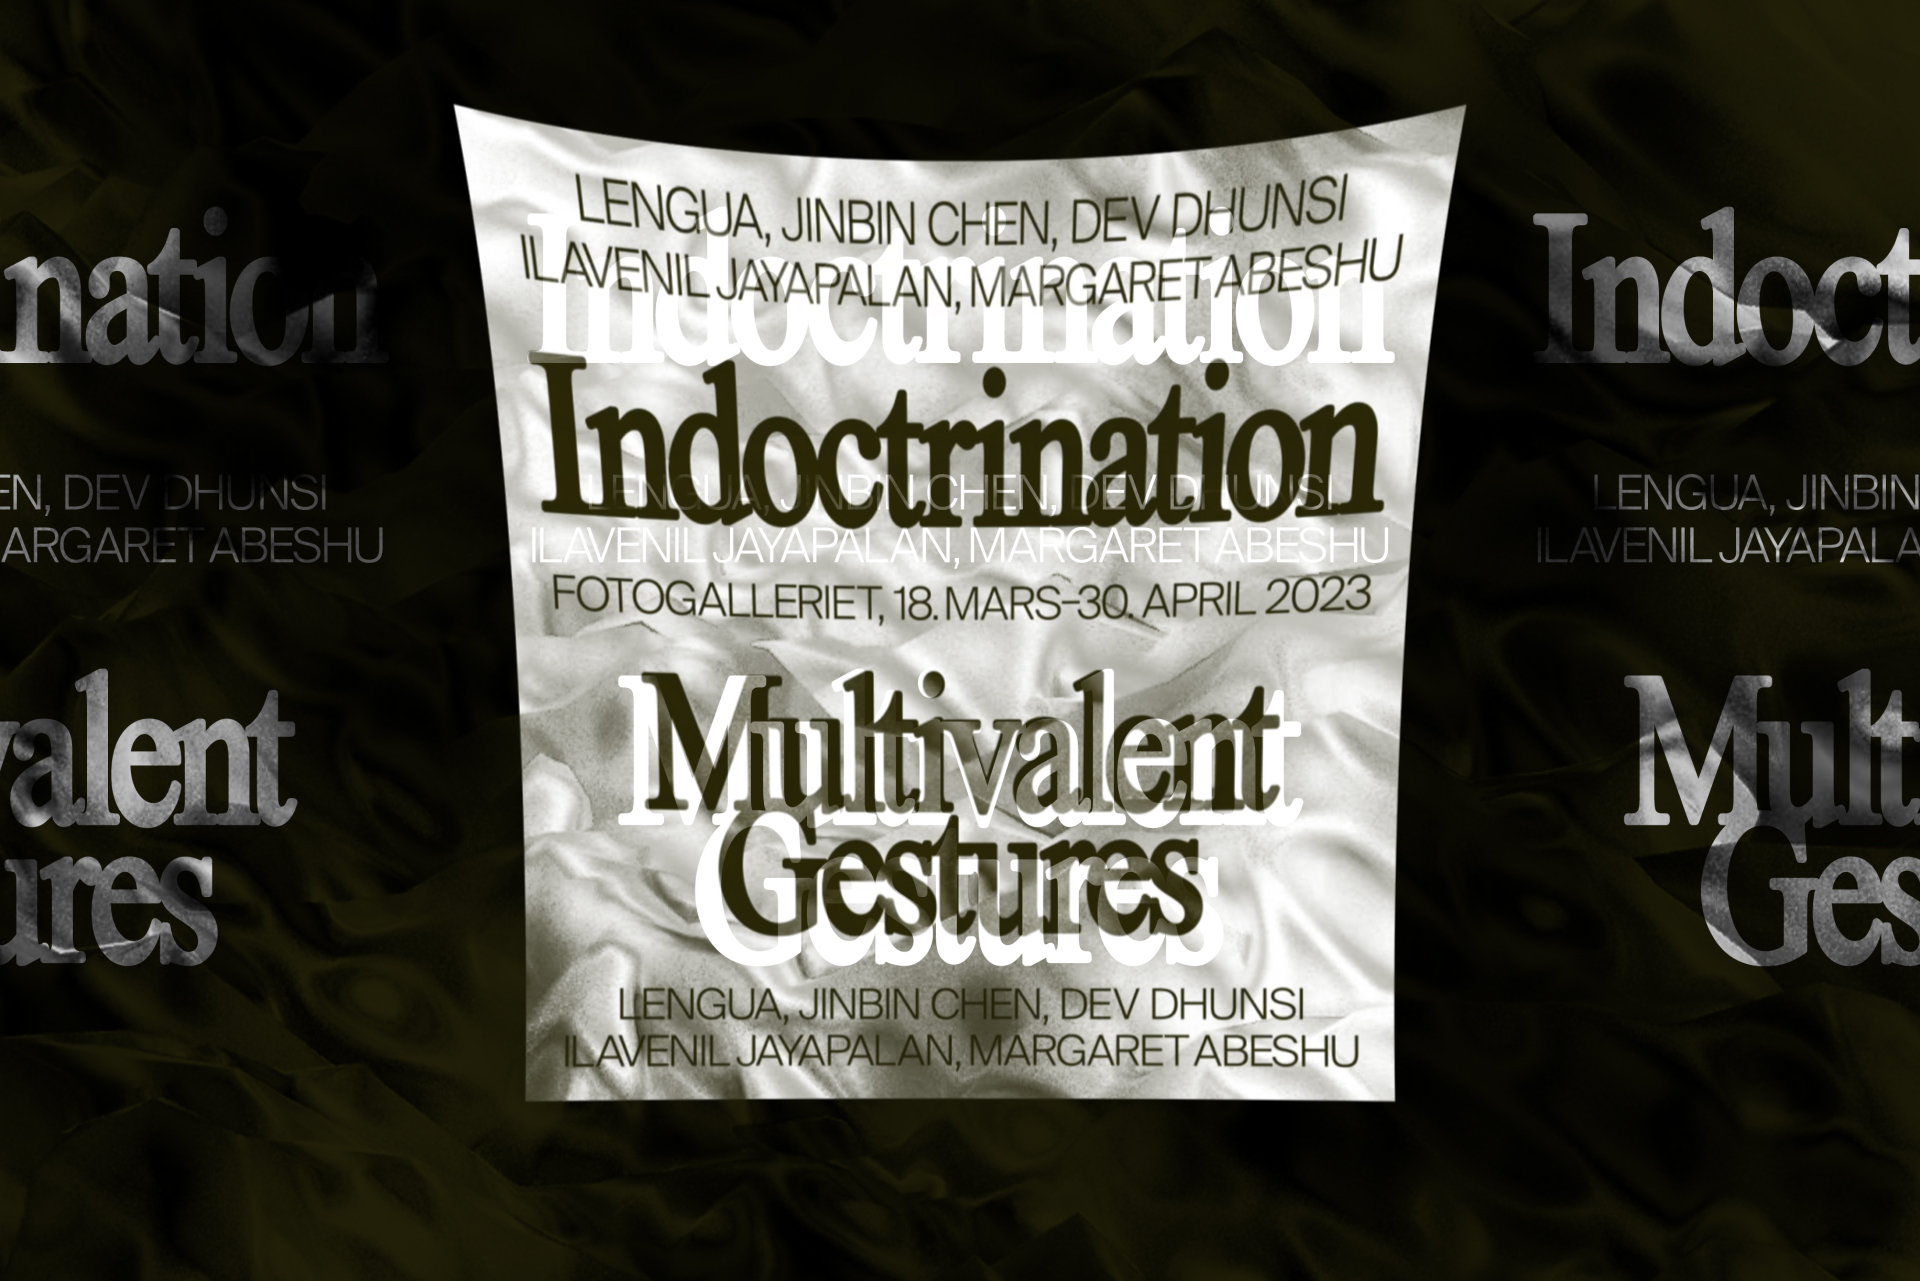 Afterparty: “Indoctrination: Multivalent Gestures”